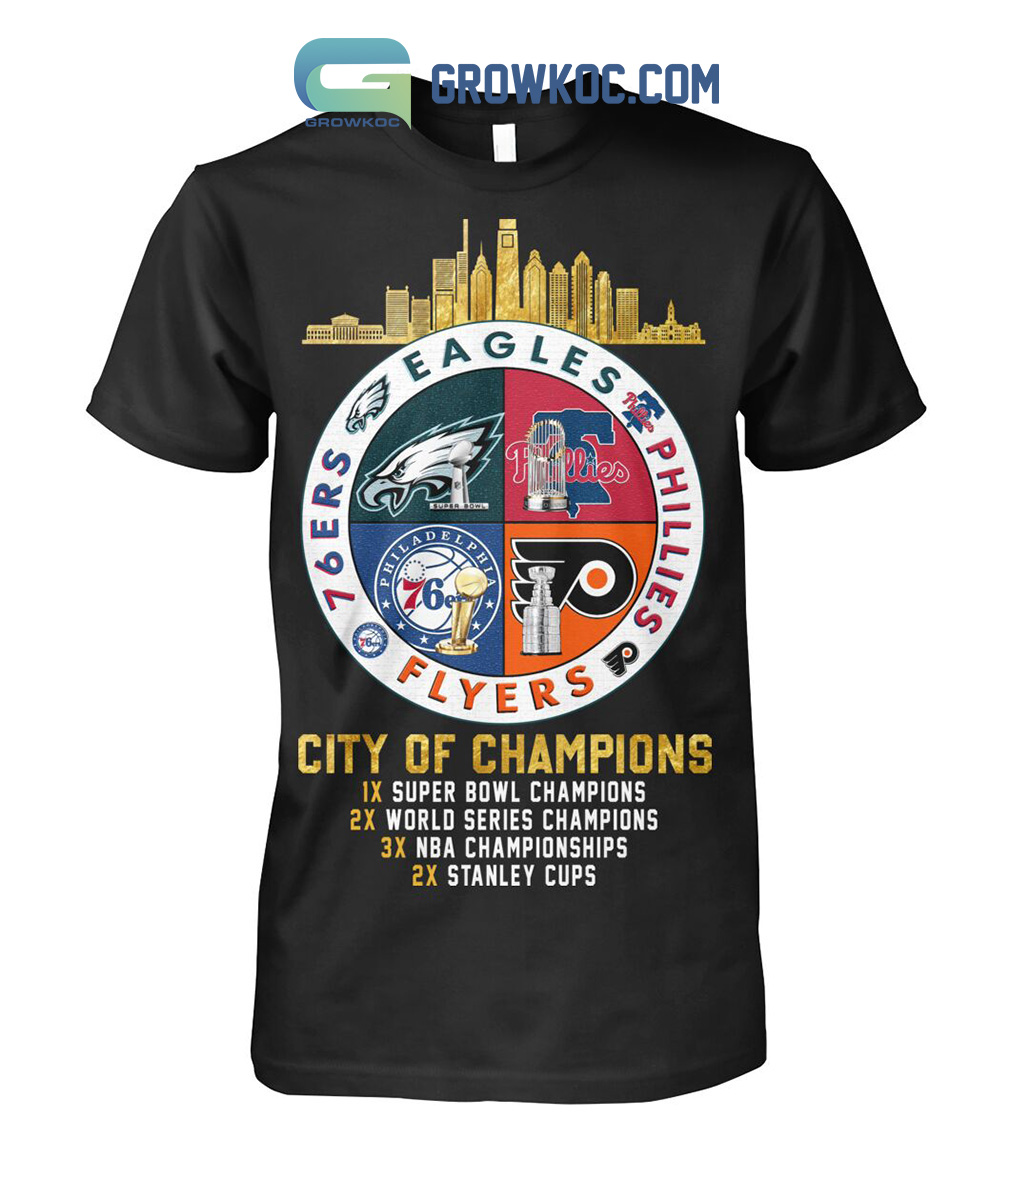 Eagles Phillies Flyers And 76Ers Philadelphia City Of Champions